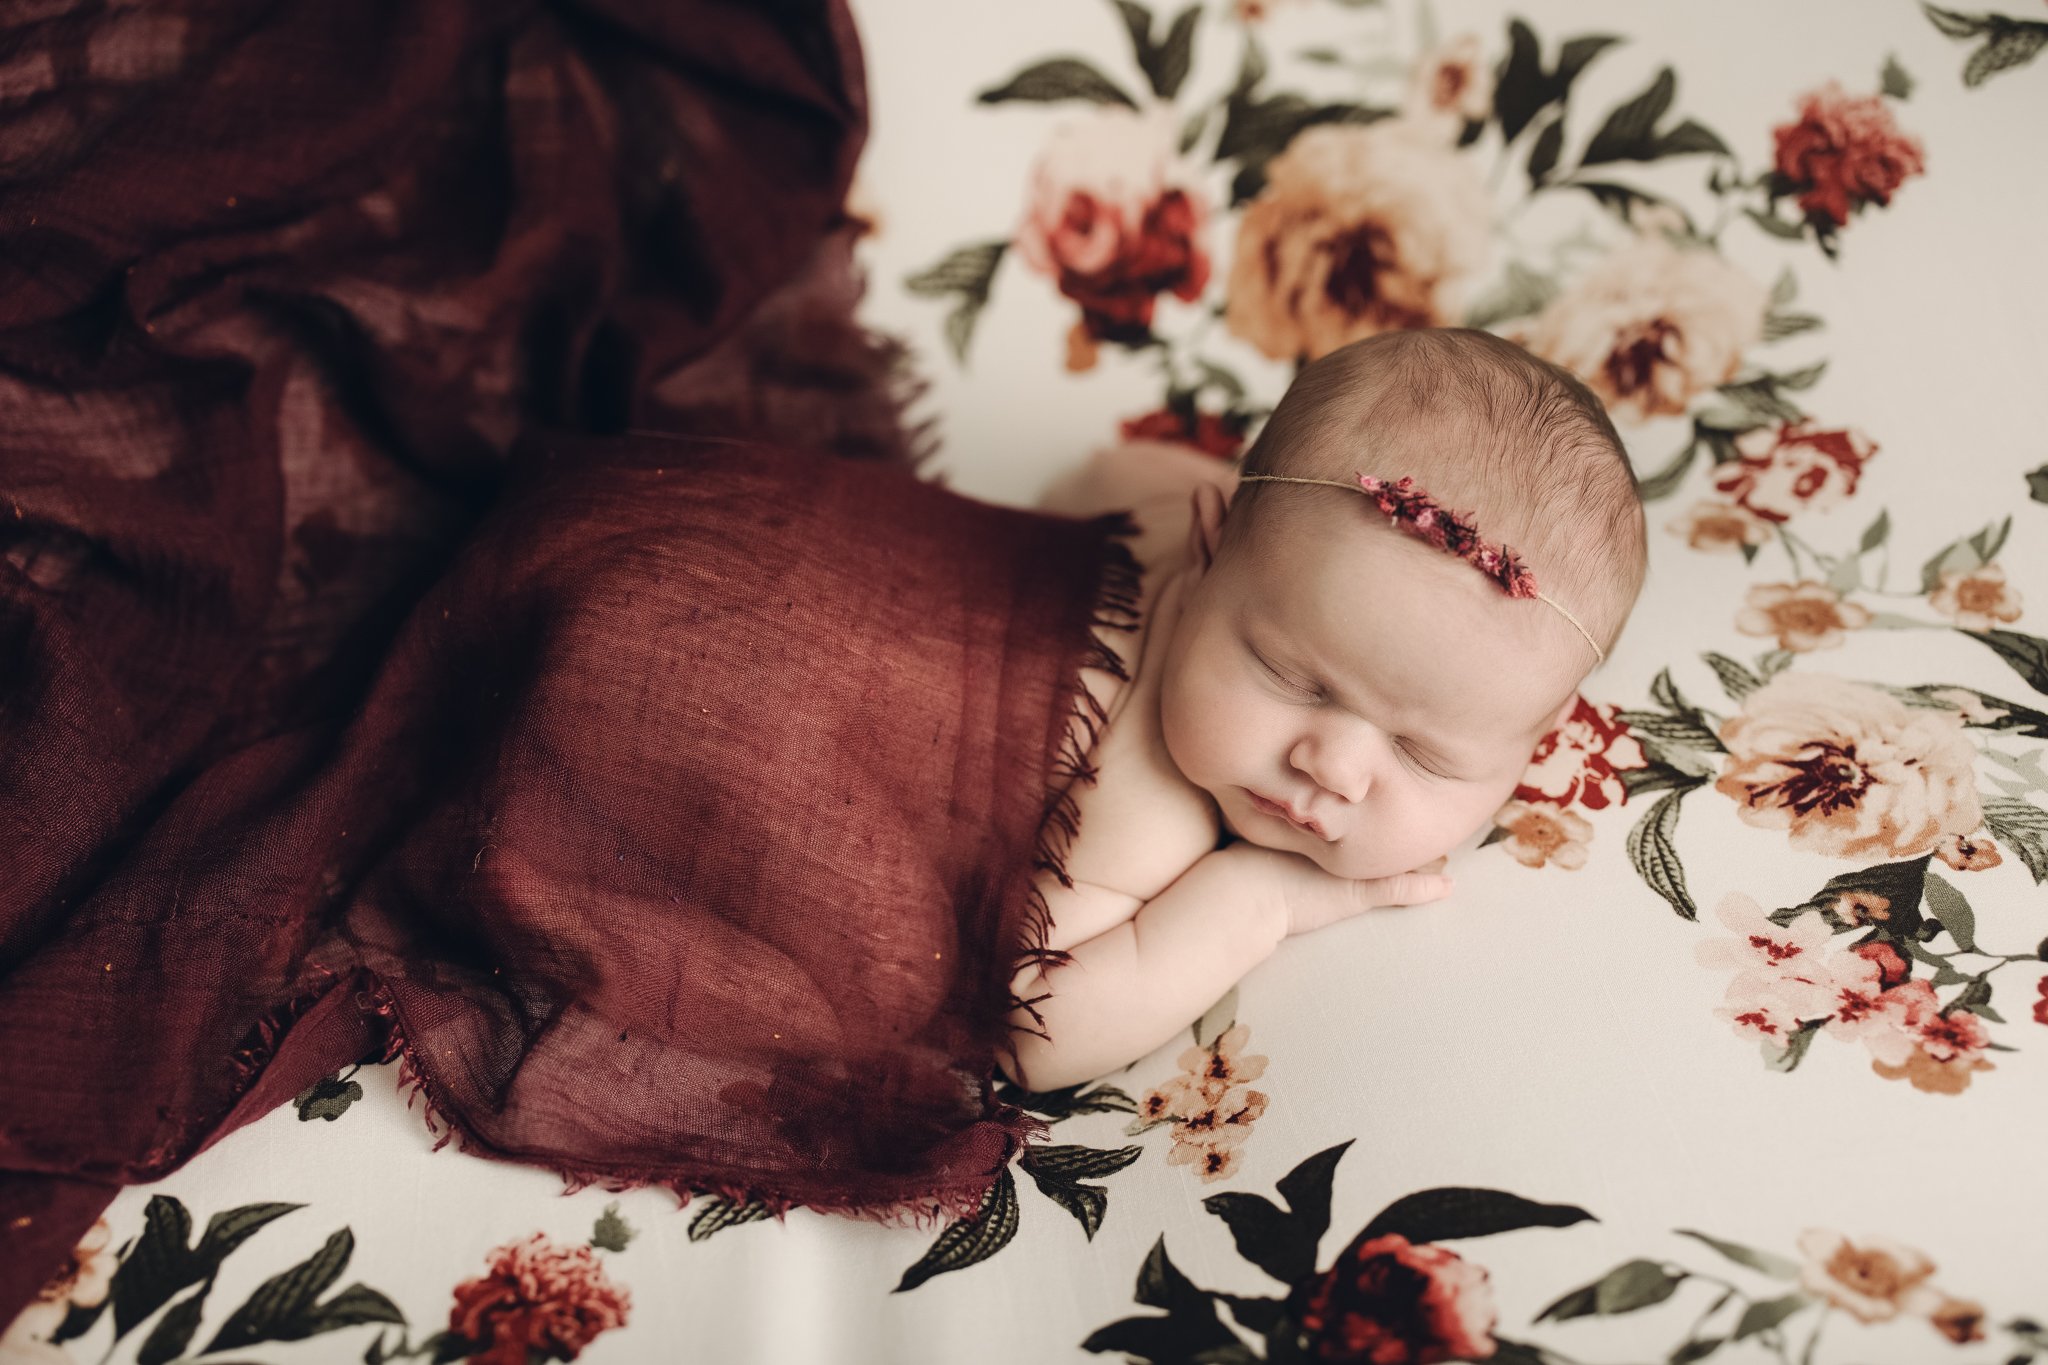 Posed_Studio_Newborn_Photographer_Second_Child_Siblings_Baby_Girl_Pink_Floral_by_Christie_Leigh_Photo_Champion_OH_Ohio_Trumbull_County-13.jpg